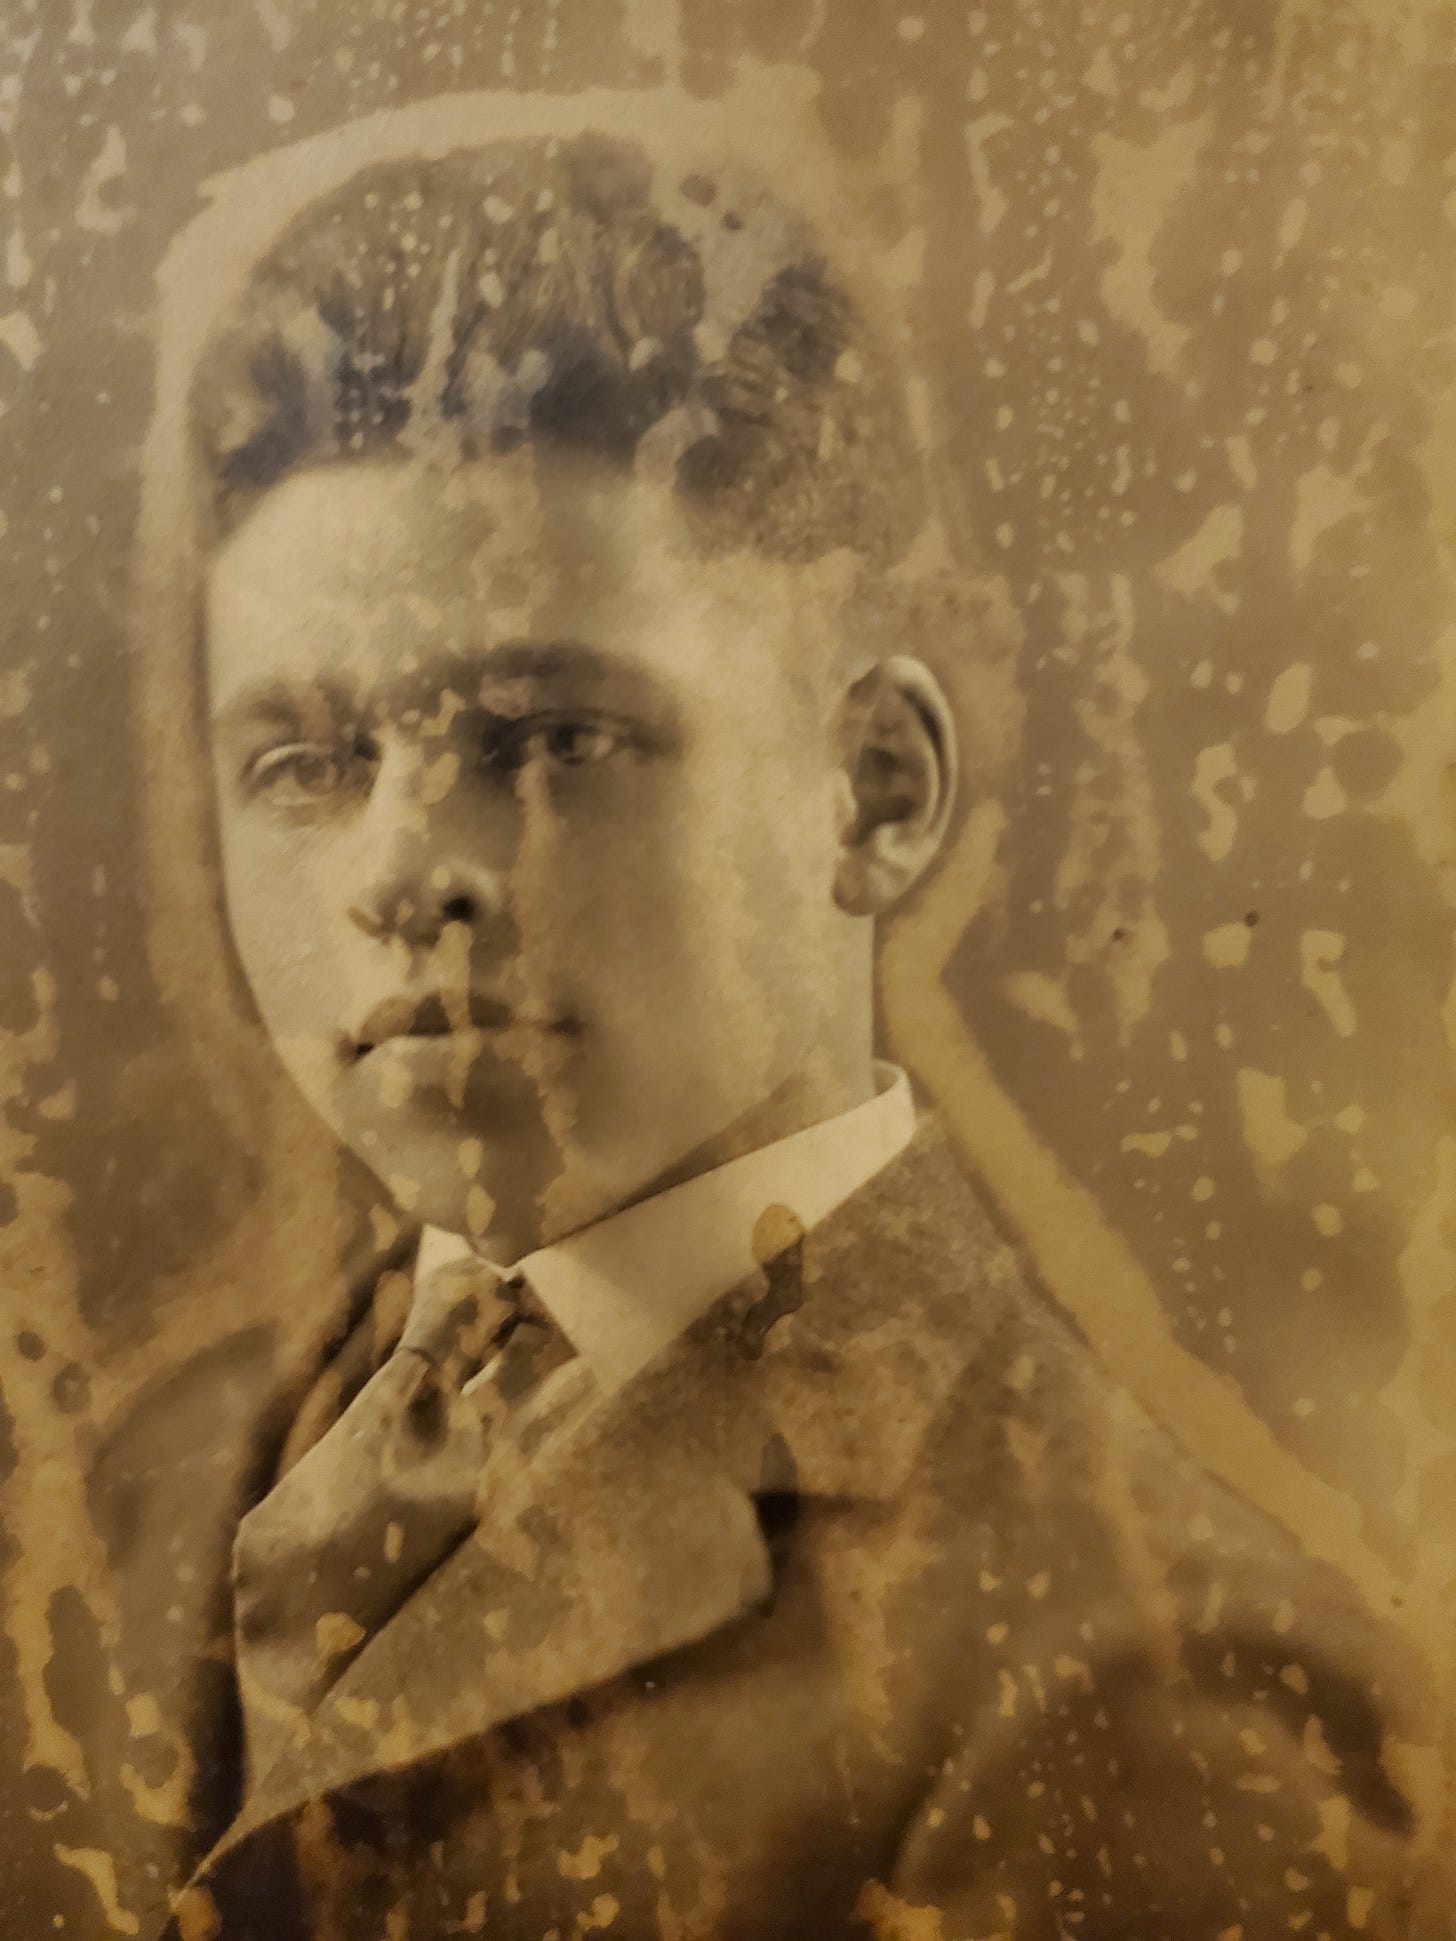 A damaged sepia photograph of a young man with short, curly hair, in a brown suit with a tie. 